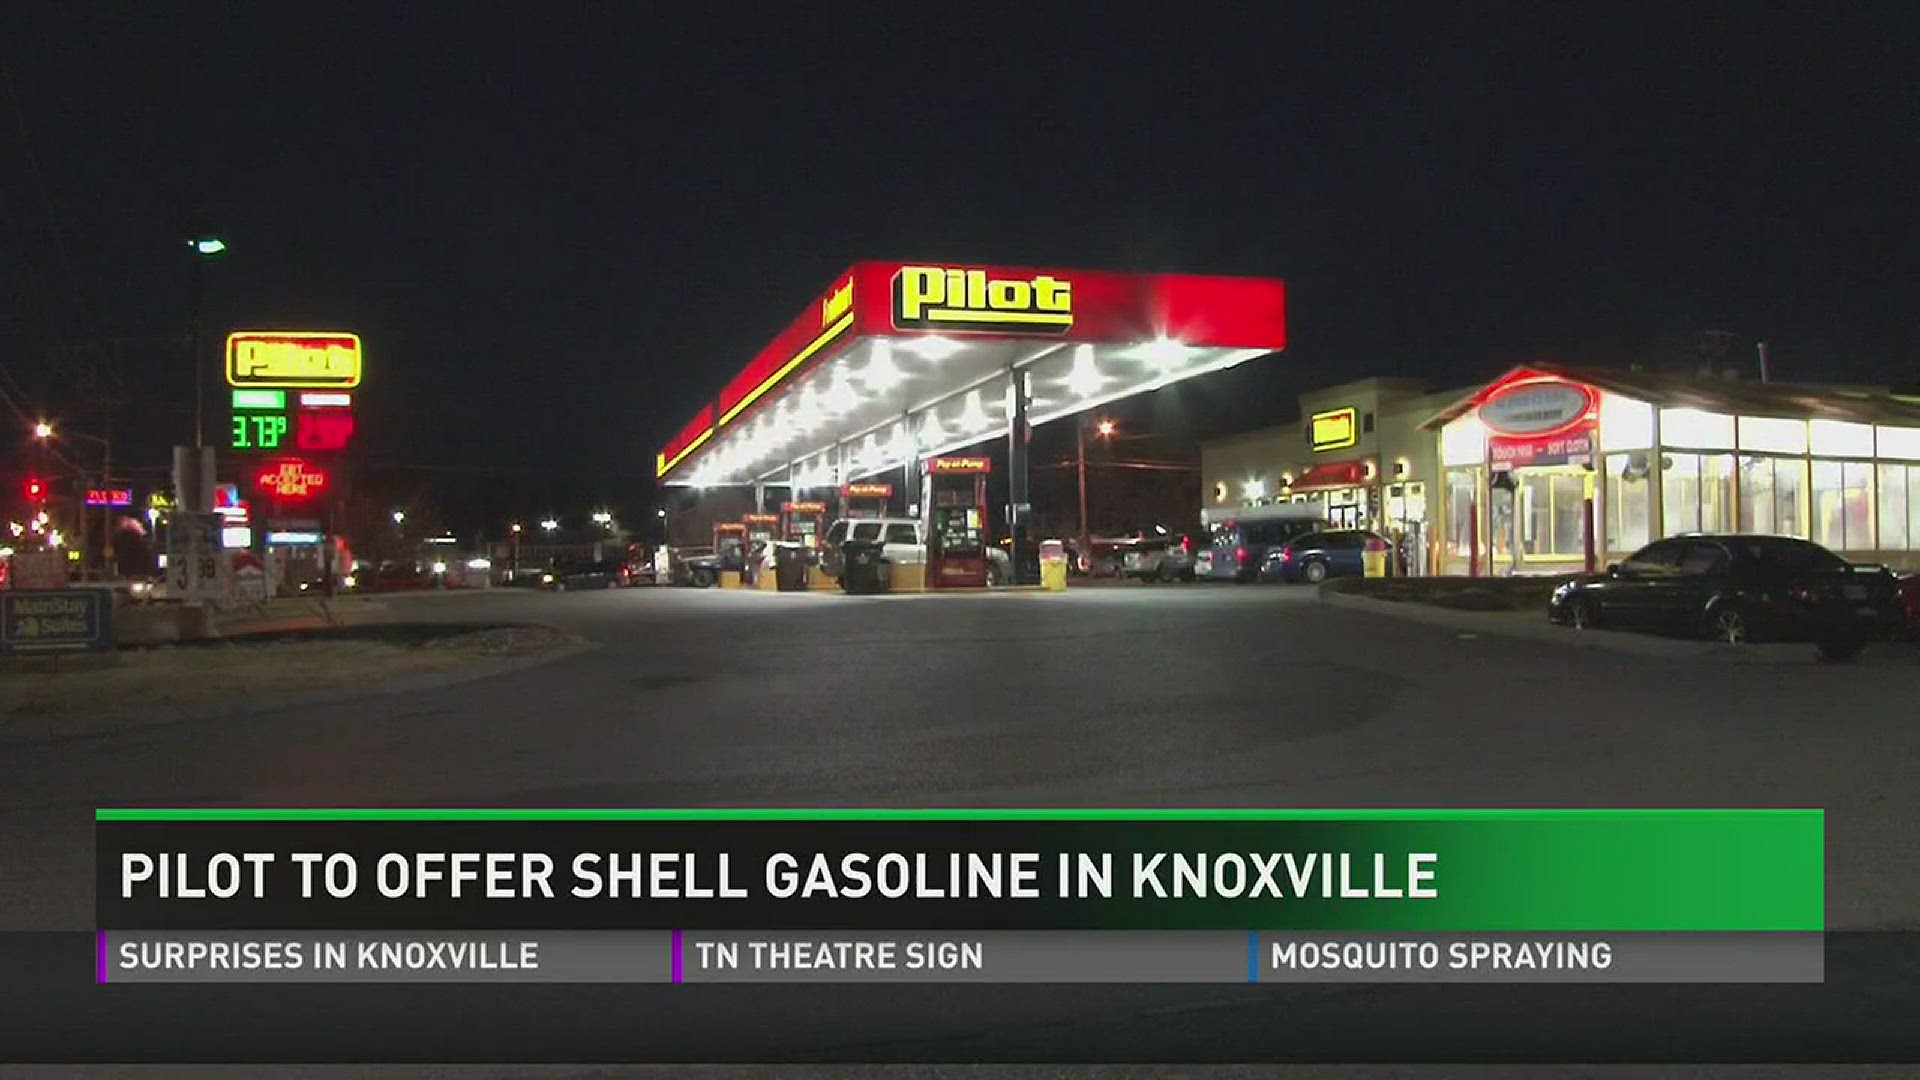 Pilot Corp. will begin to offer Shell gasoline at 29 Knoxville-Area stores starting this month, according to a release from the company.